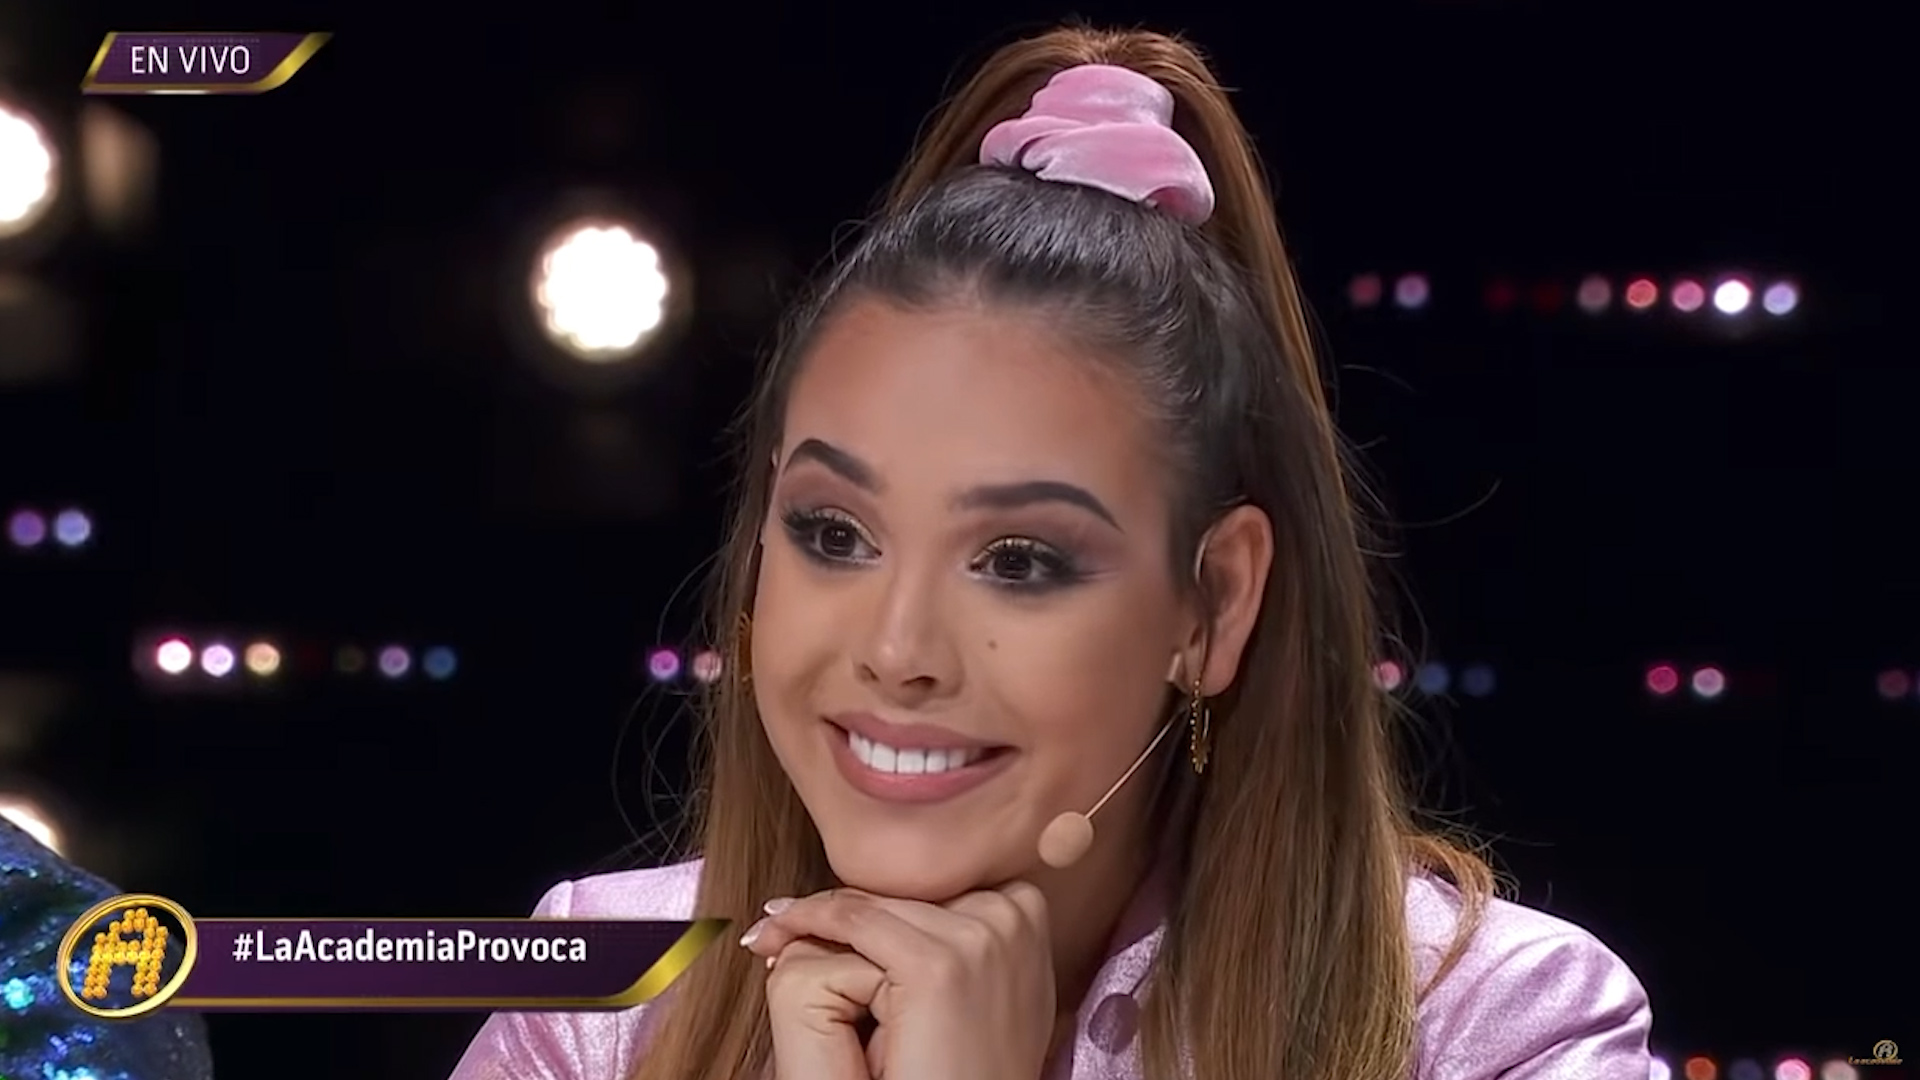 Fans expect another controversy like Danna Paola's 